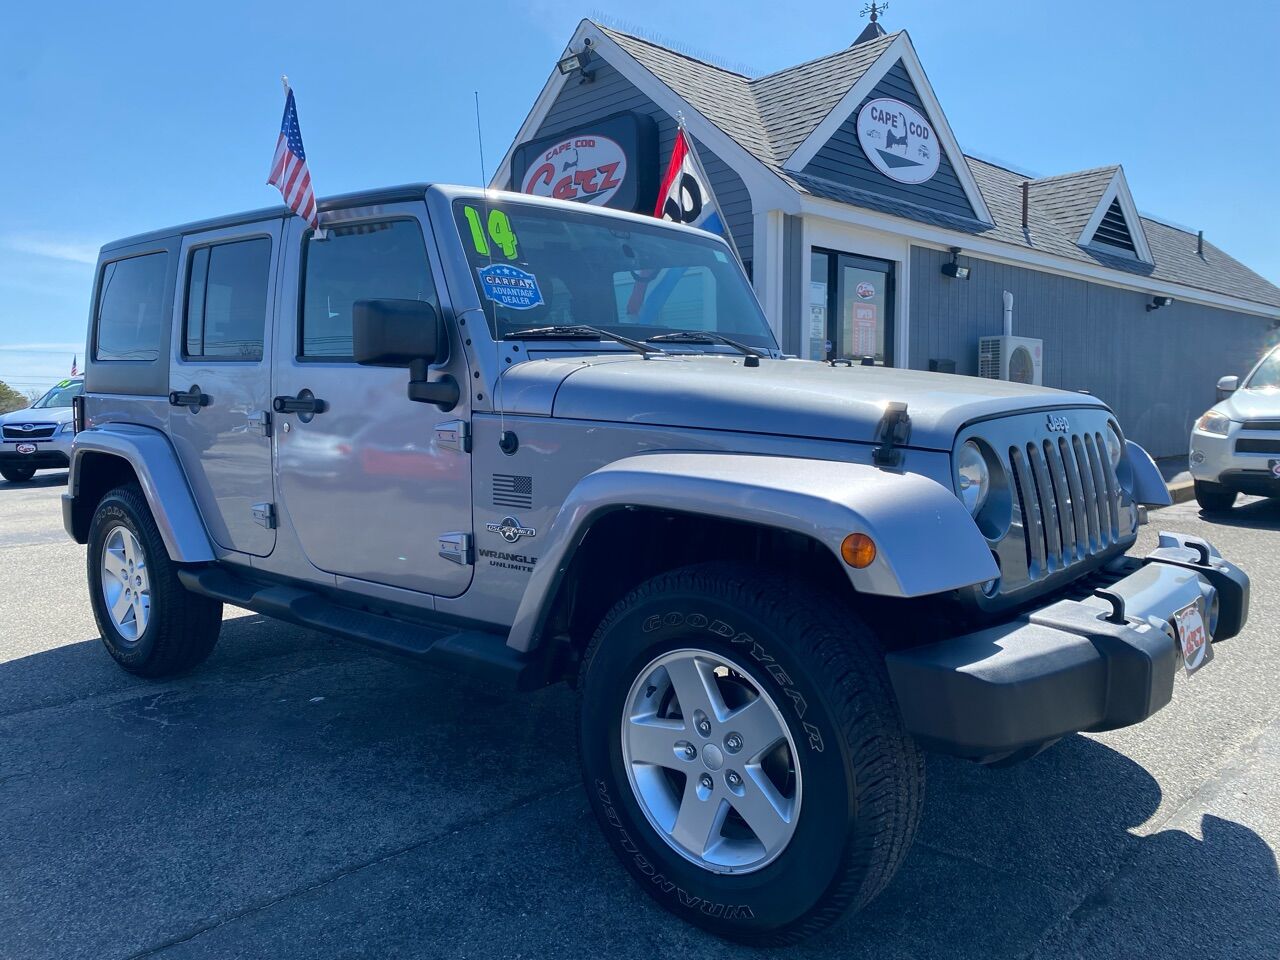 Jeep Wrangler For Sale In Hyannis, MA ®